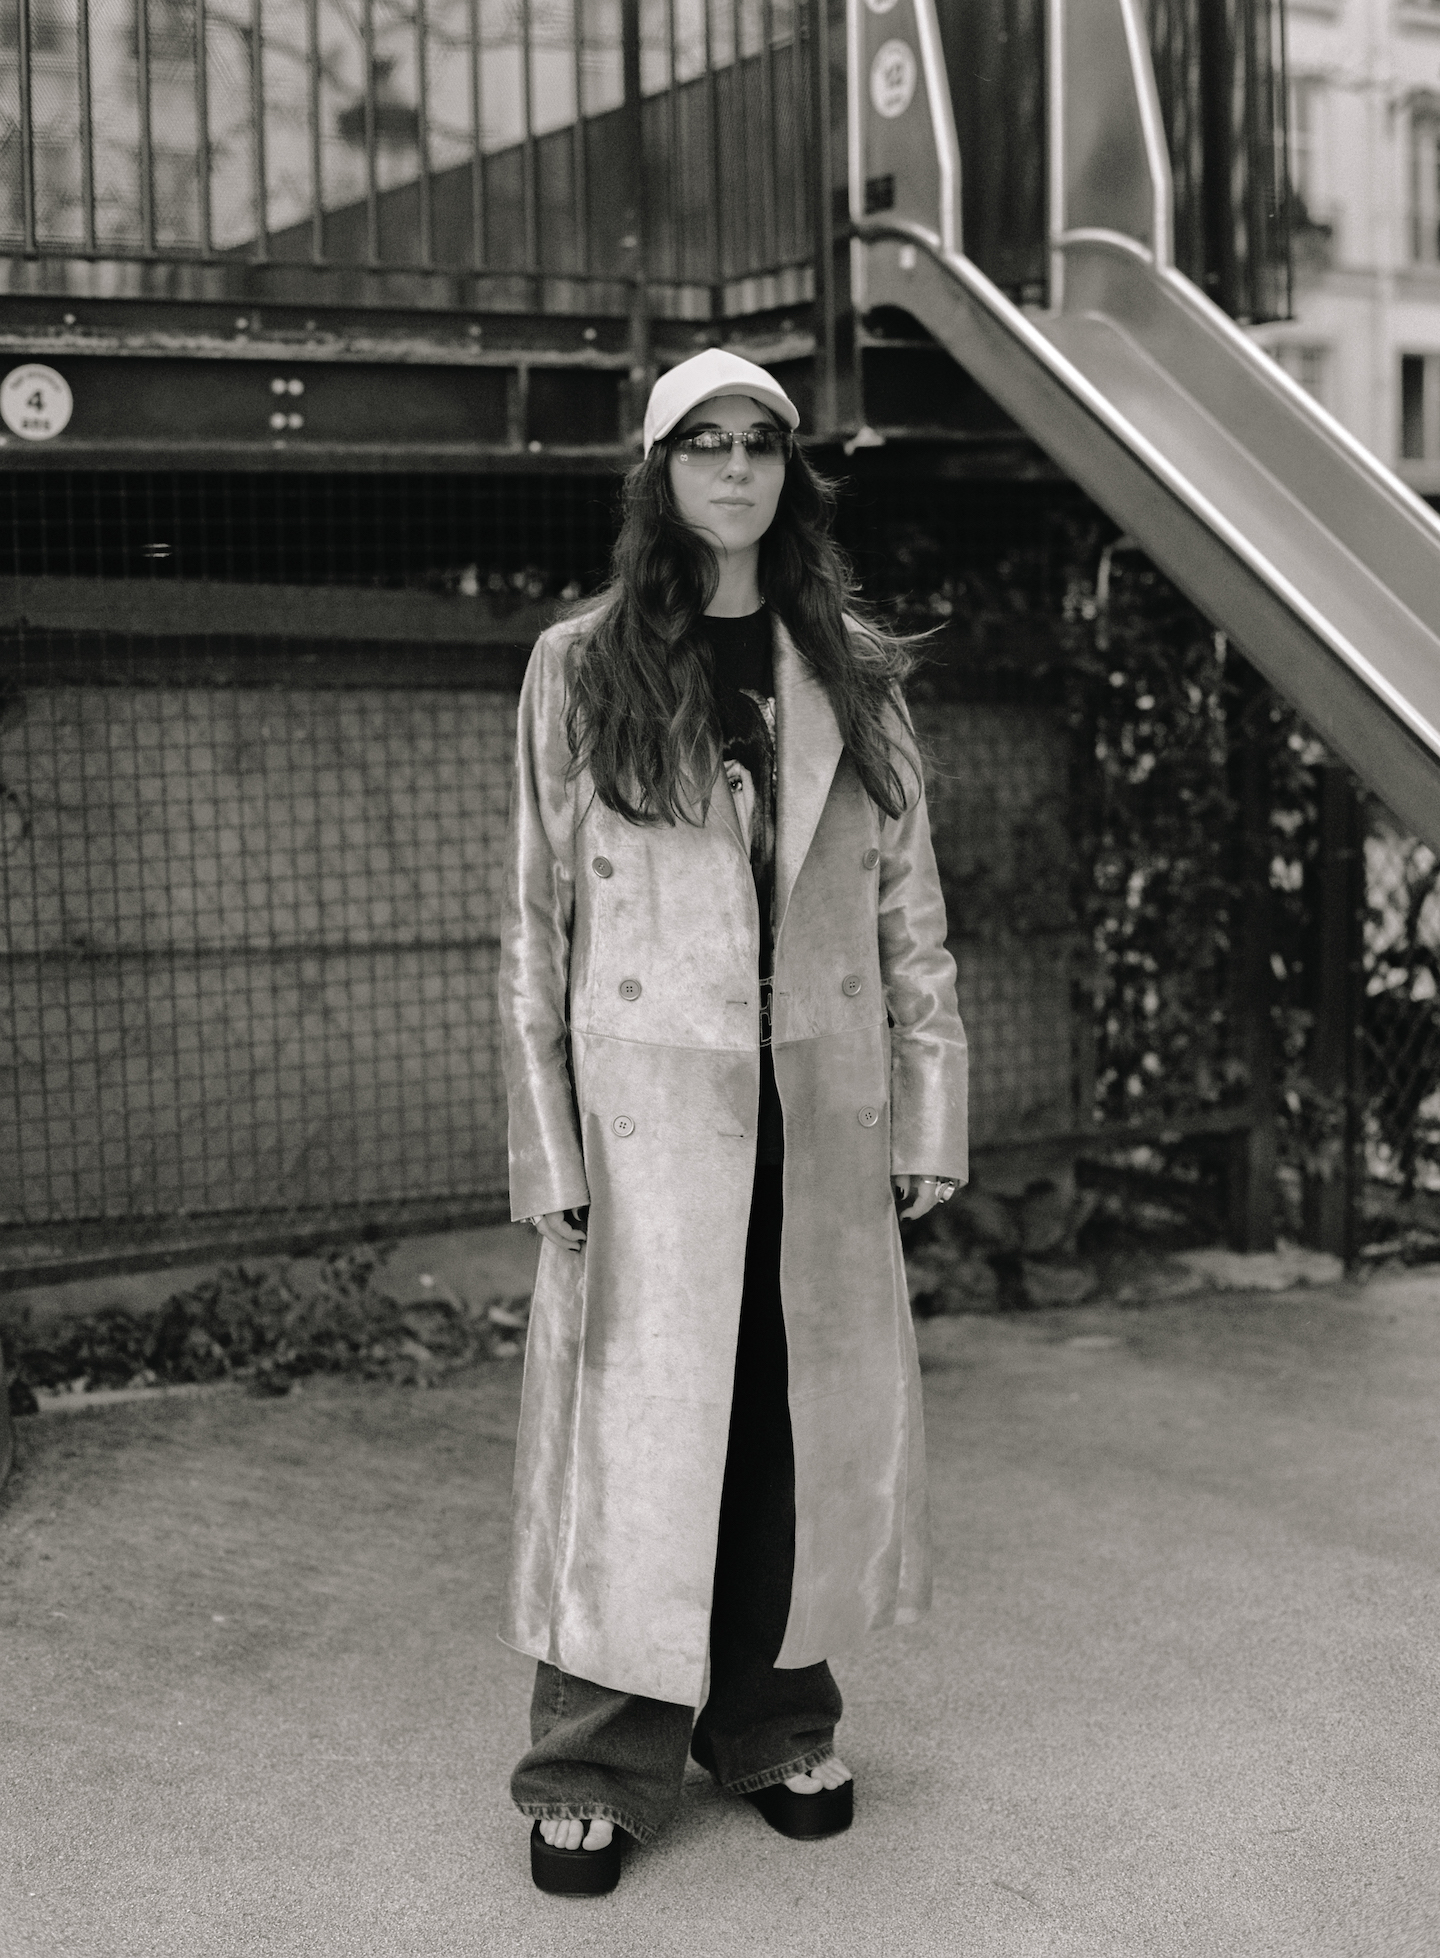 Chloe Caillet wearing a ling leather coat, cap and sunglasses, standing by a slide 